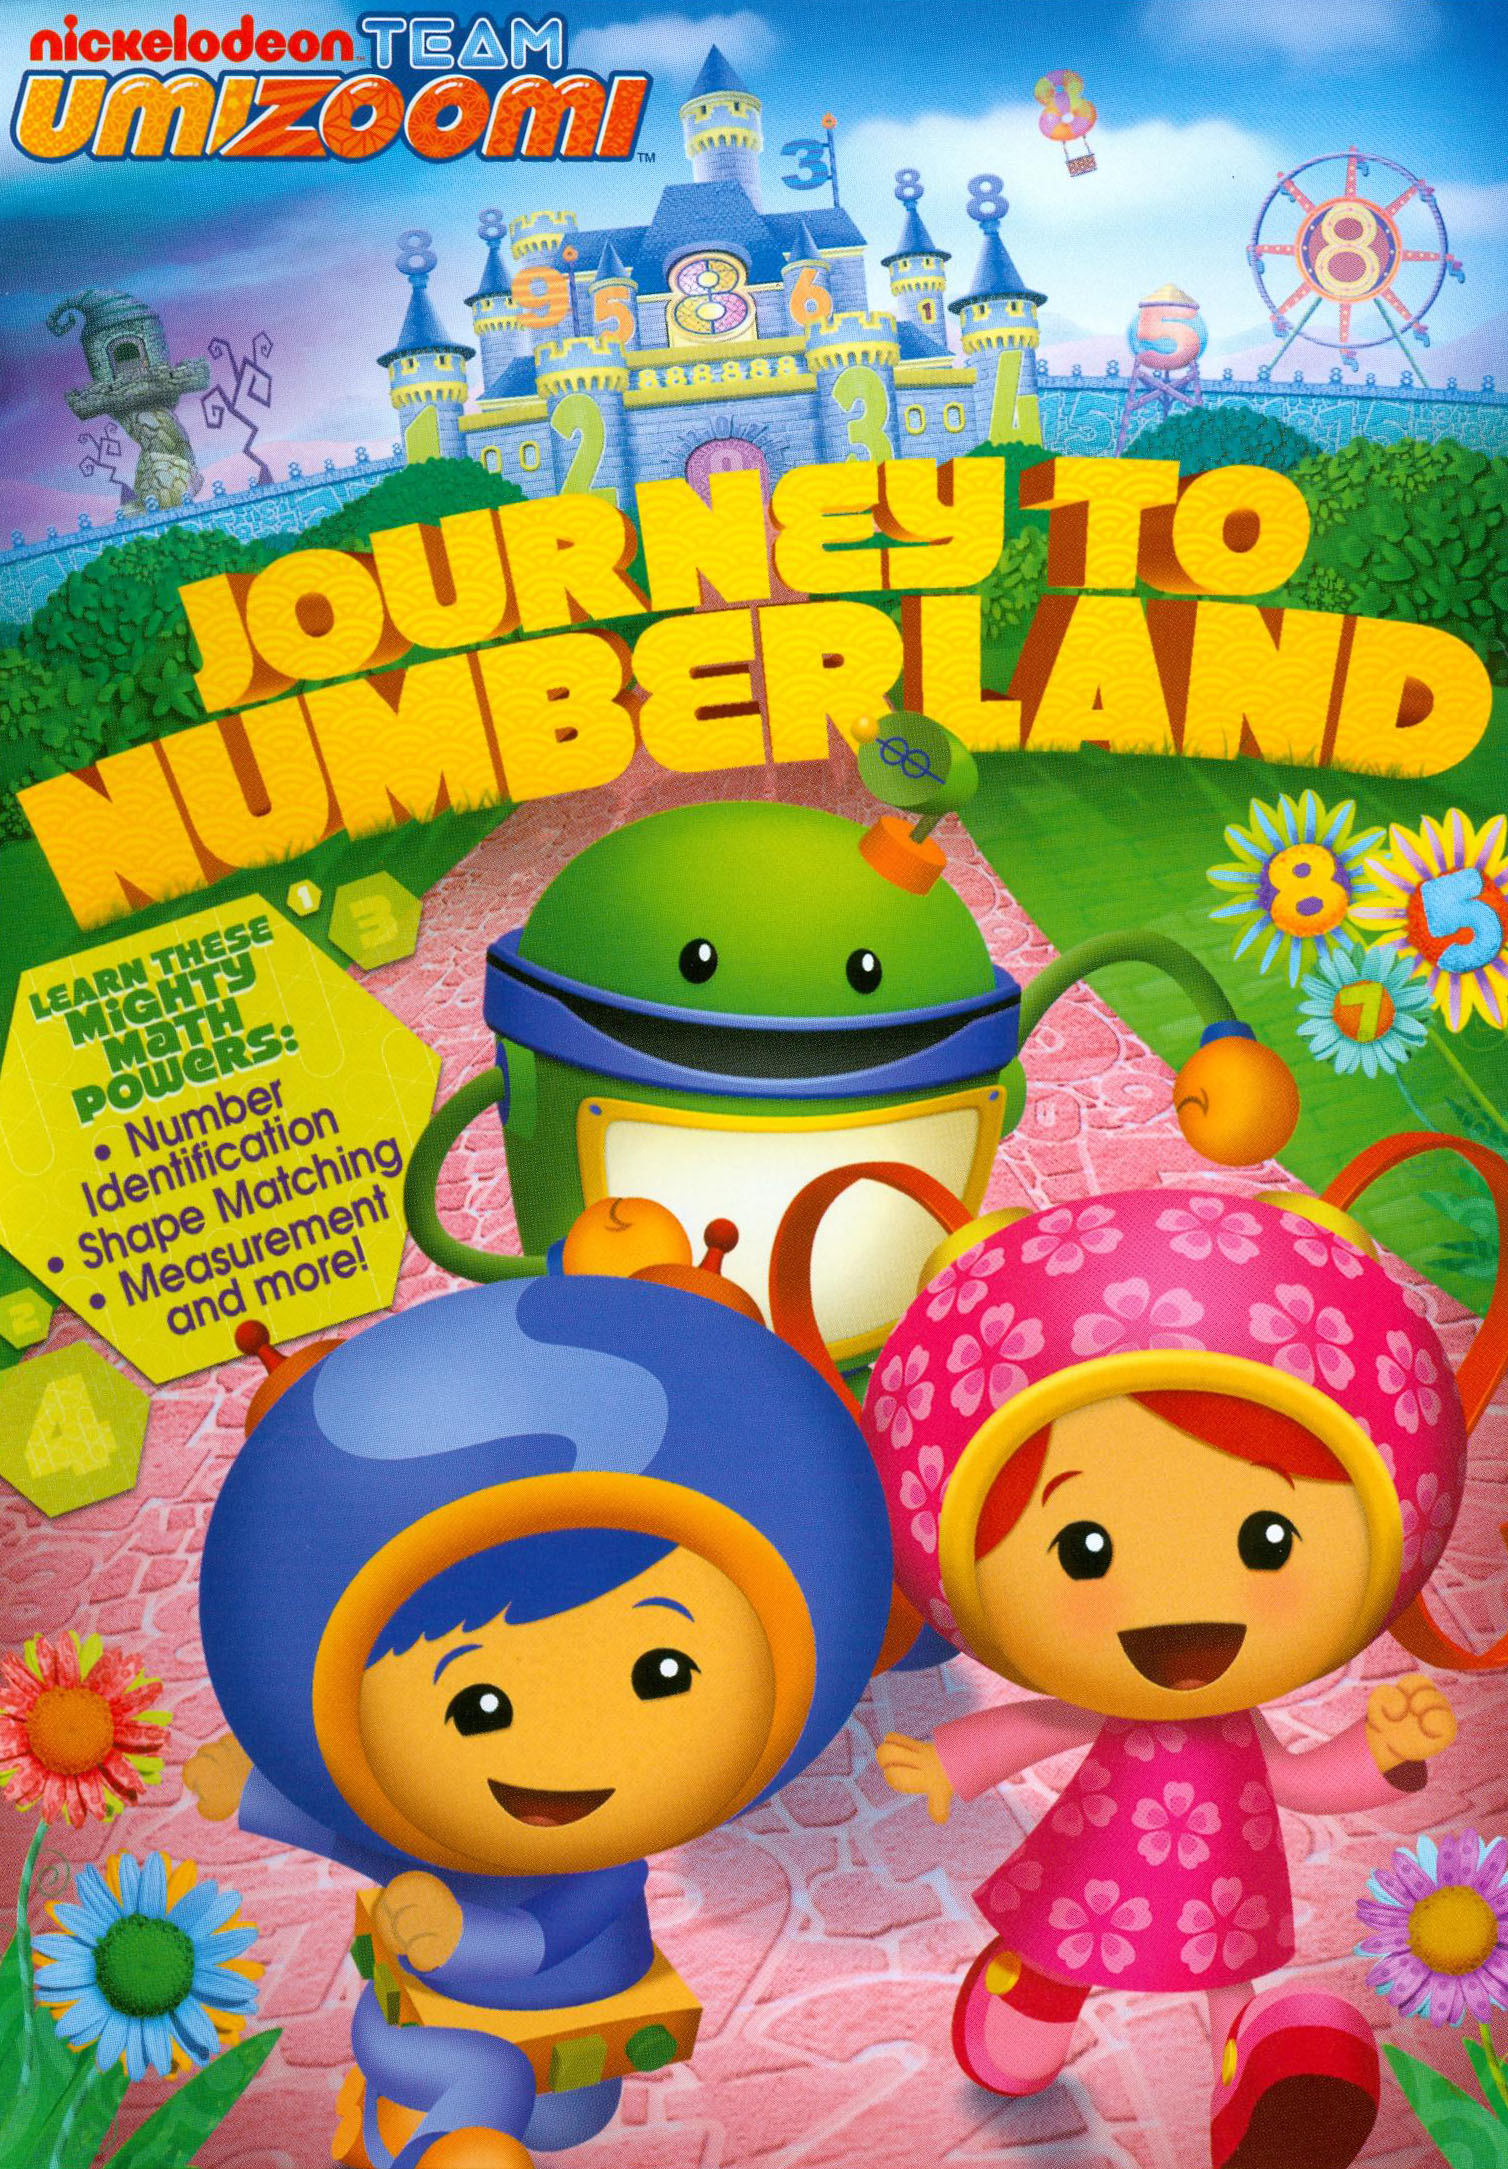 Team Umizoomi: Journey to Numberland [DVD]